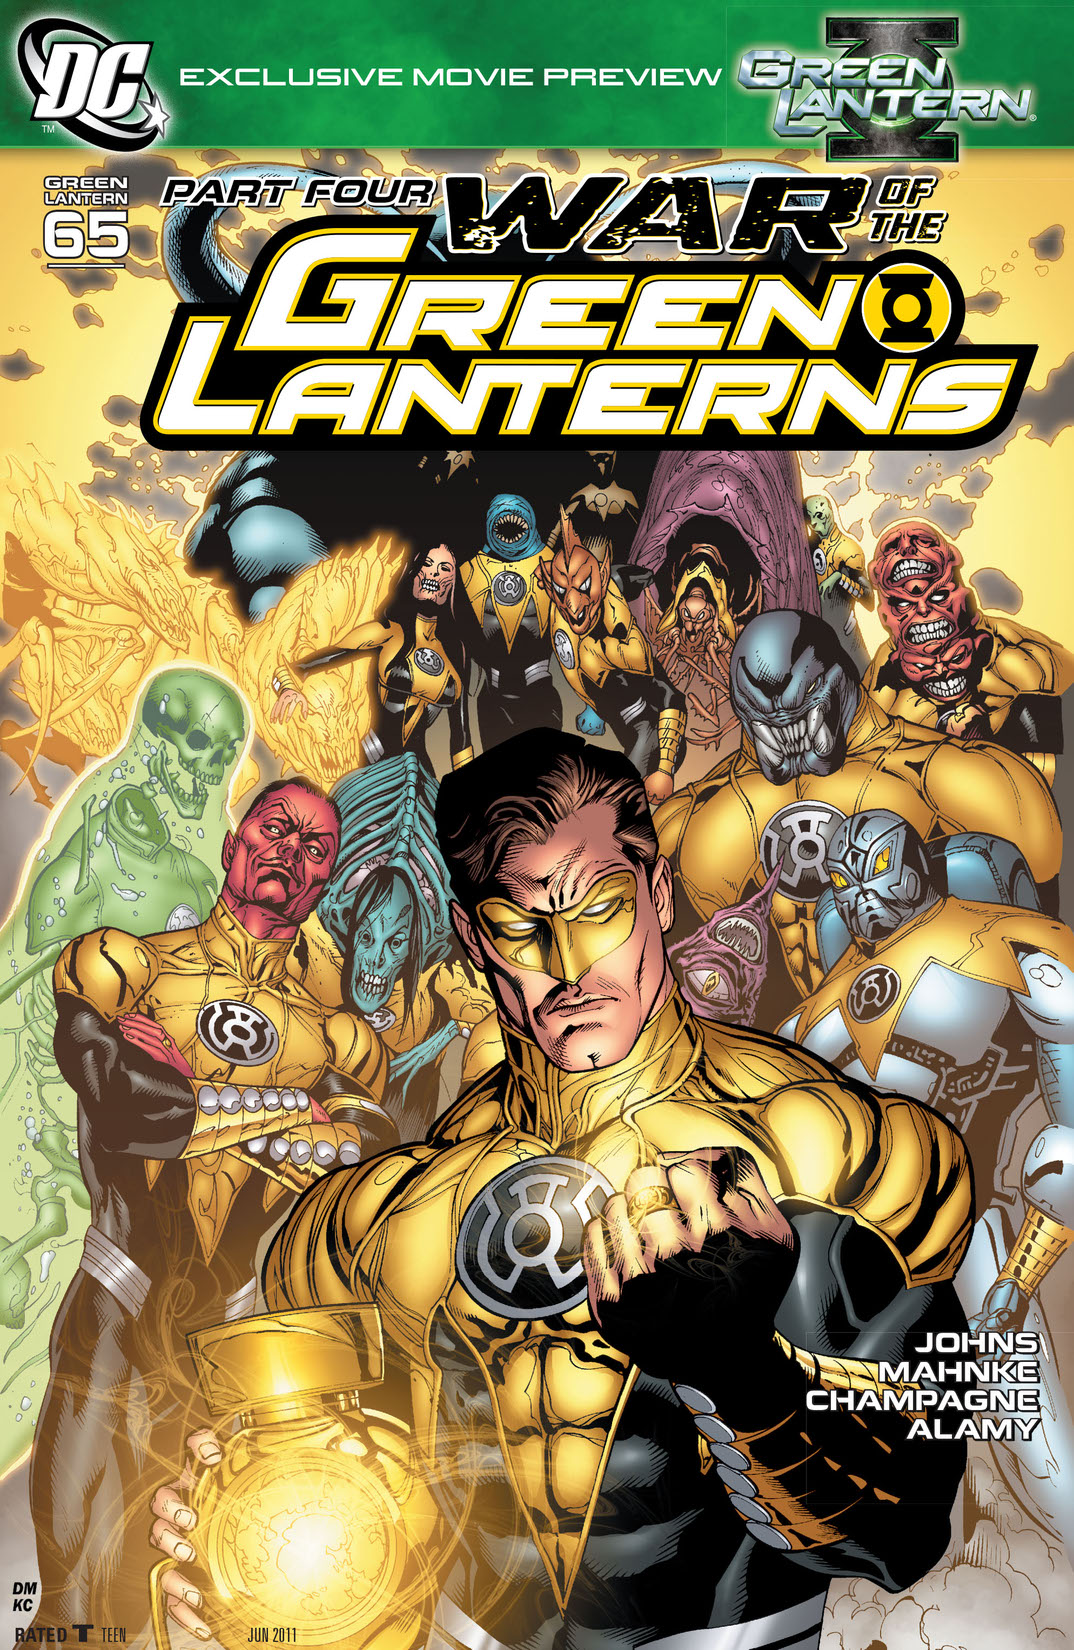 Green Lantern (2005-) #65 preview images